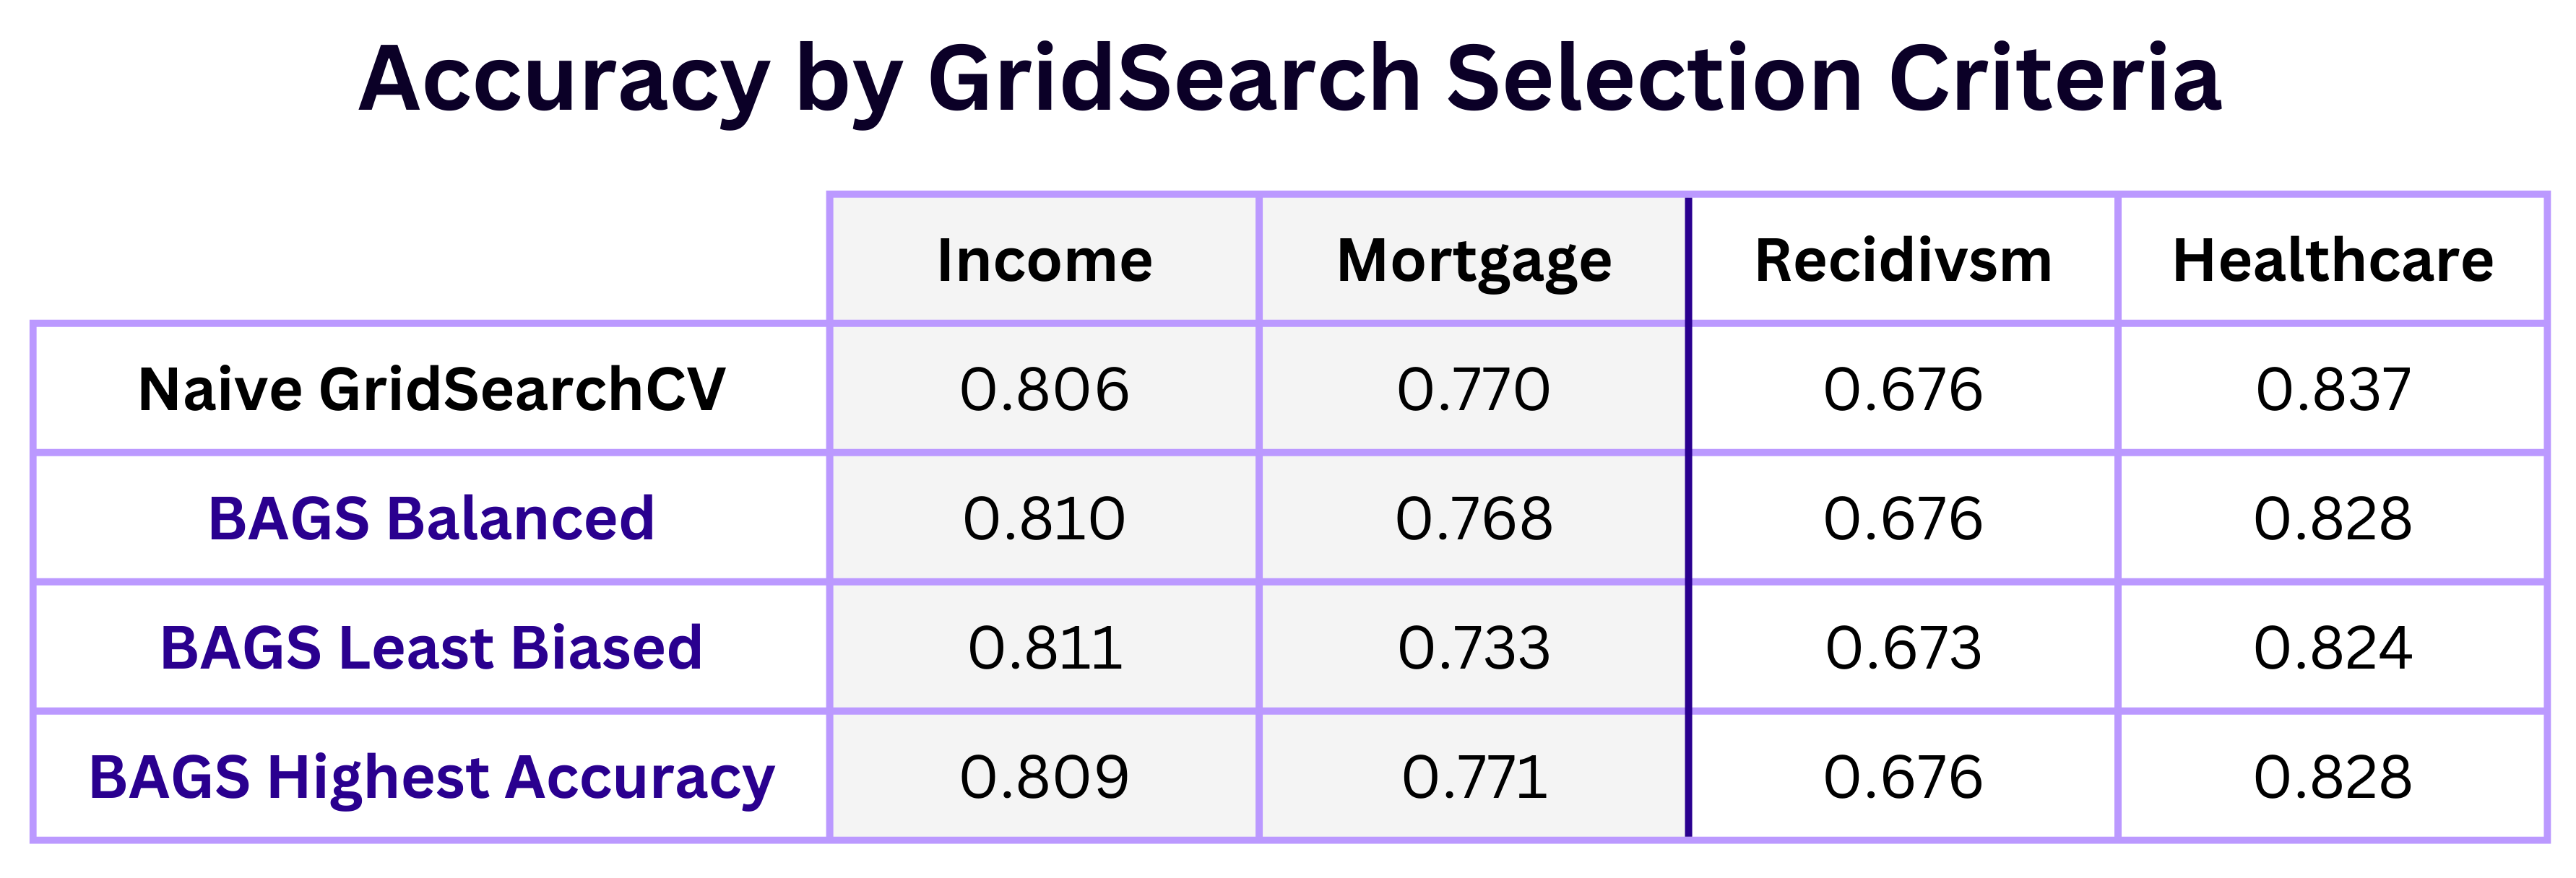 A table depicting the test set accuracy scores by gridsearch result